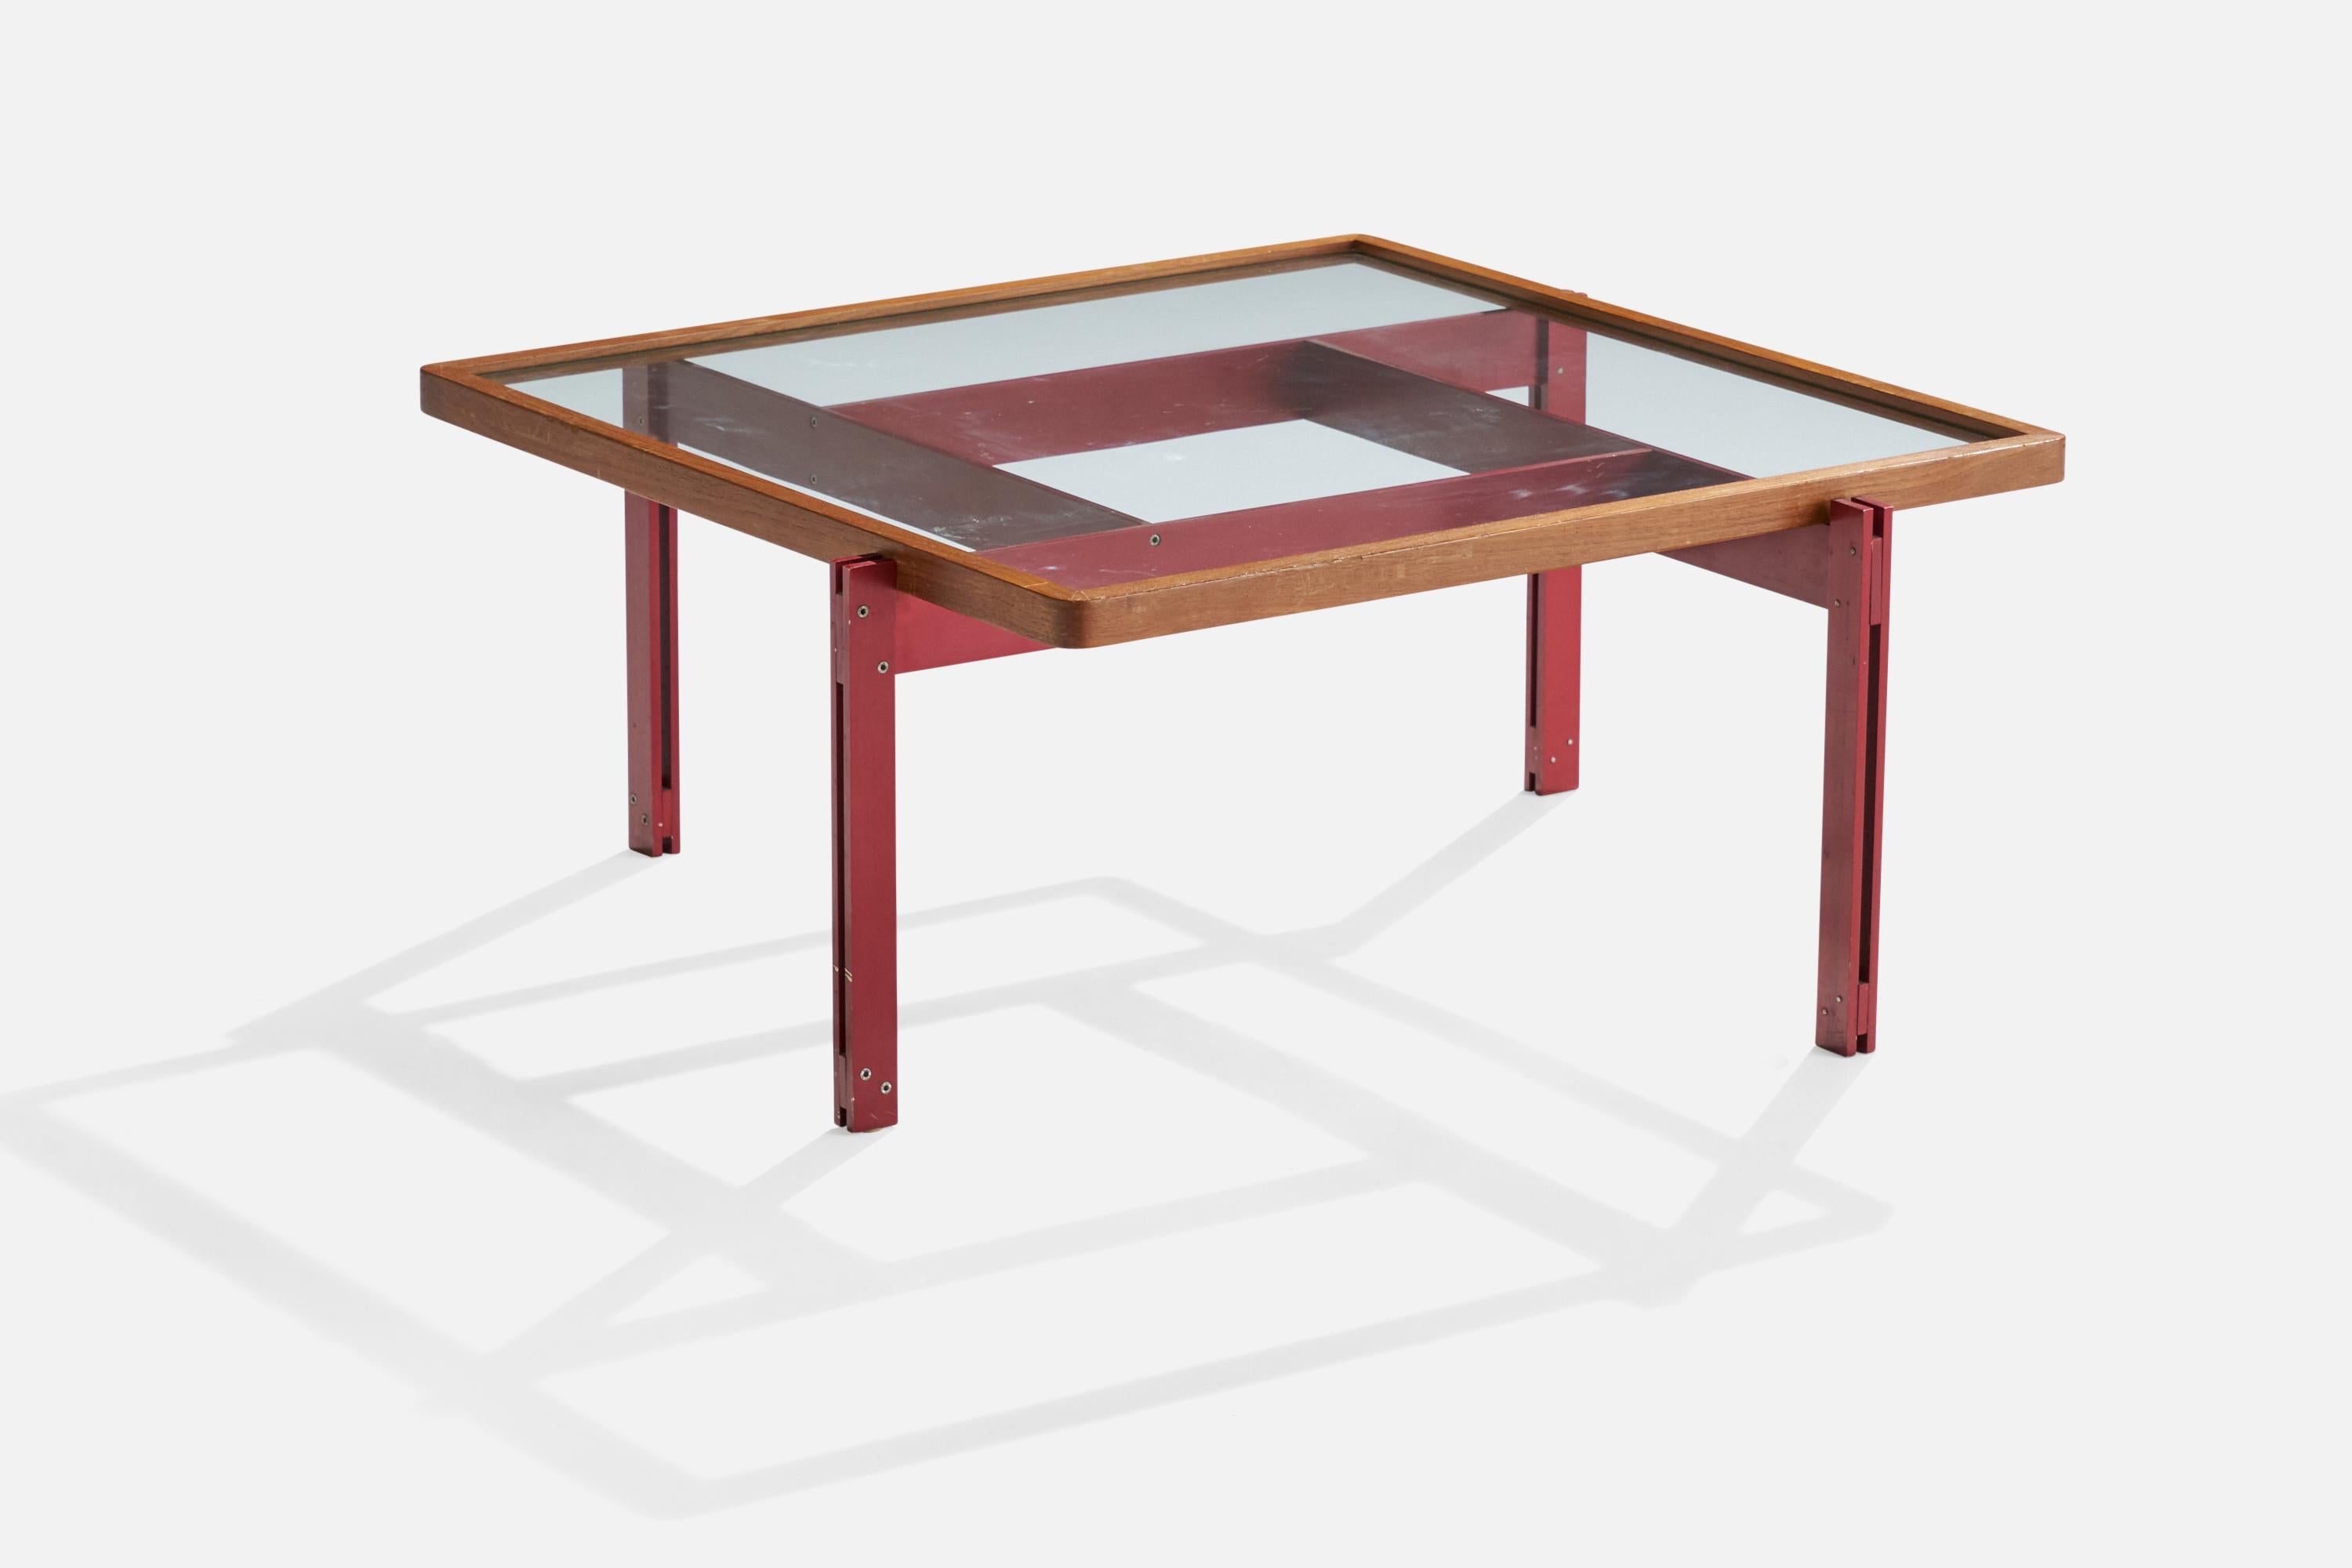 A teak, glass and red-lacquered metal coffee or cocktail table, designed and produced in Italy, c. 1960s.